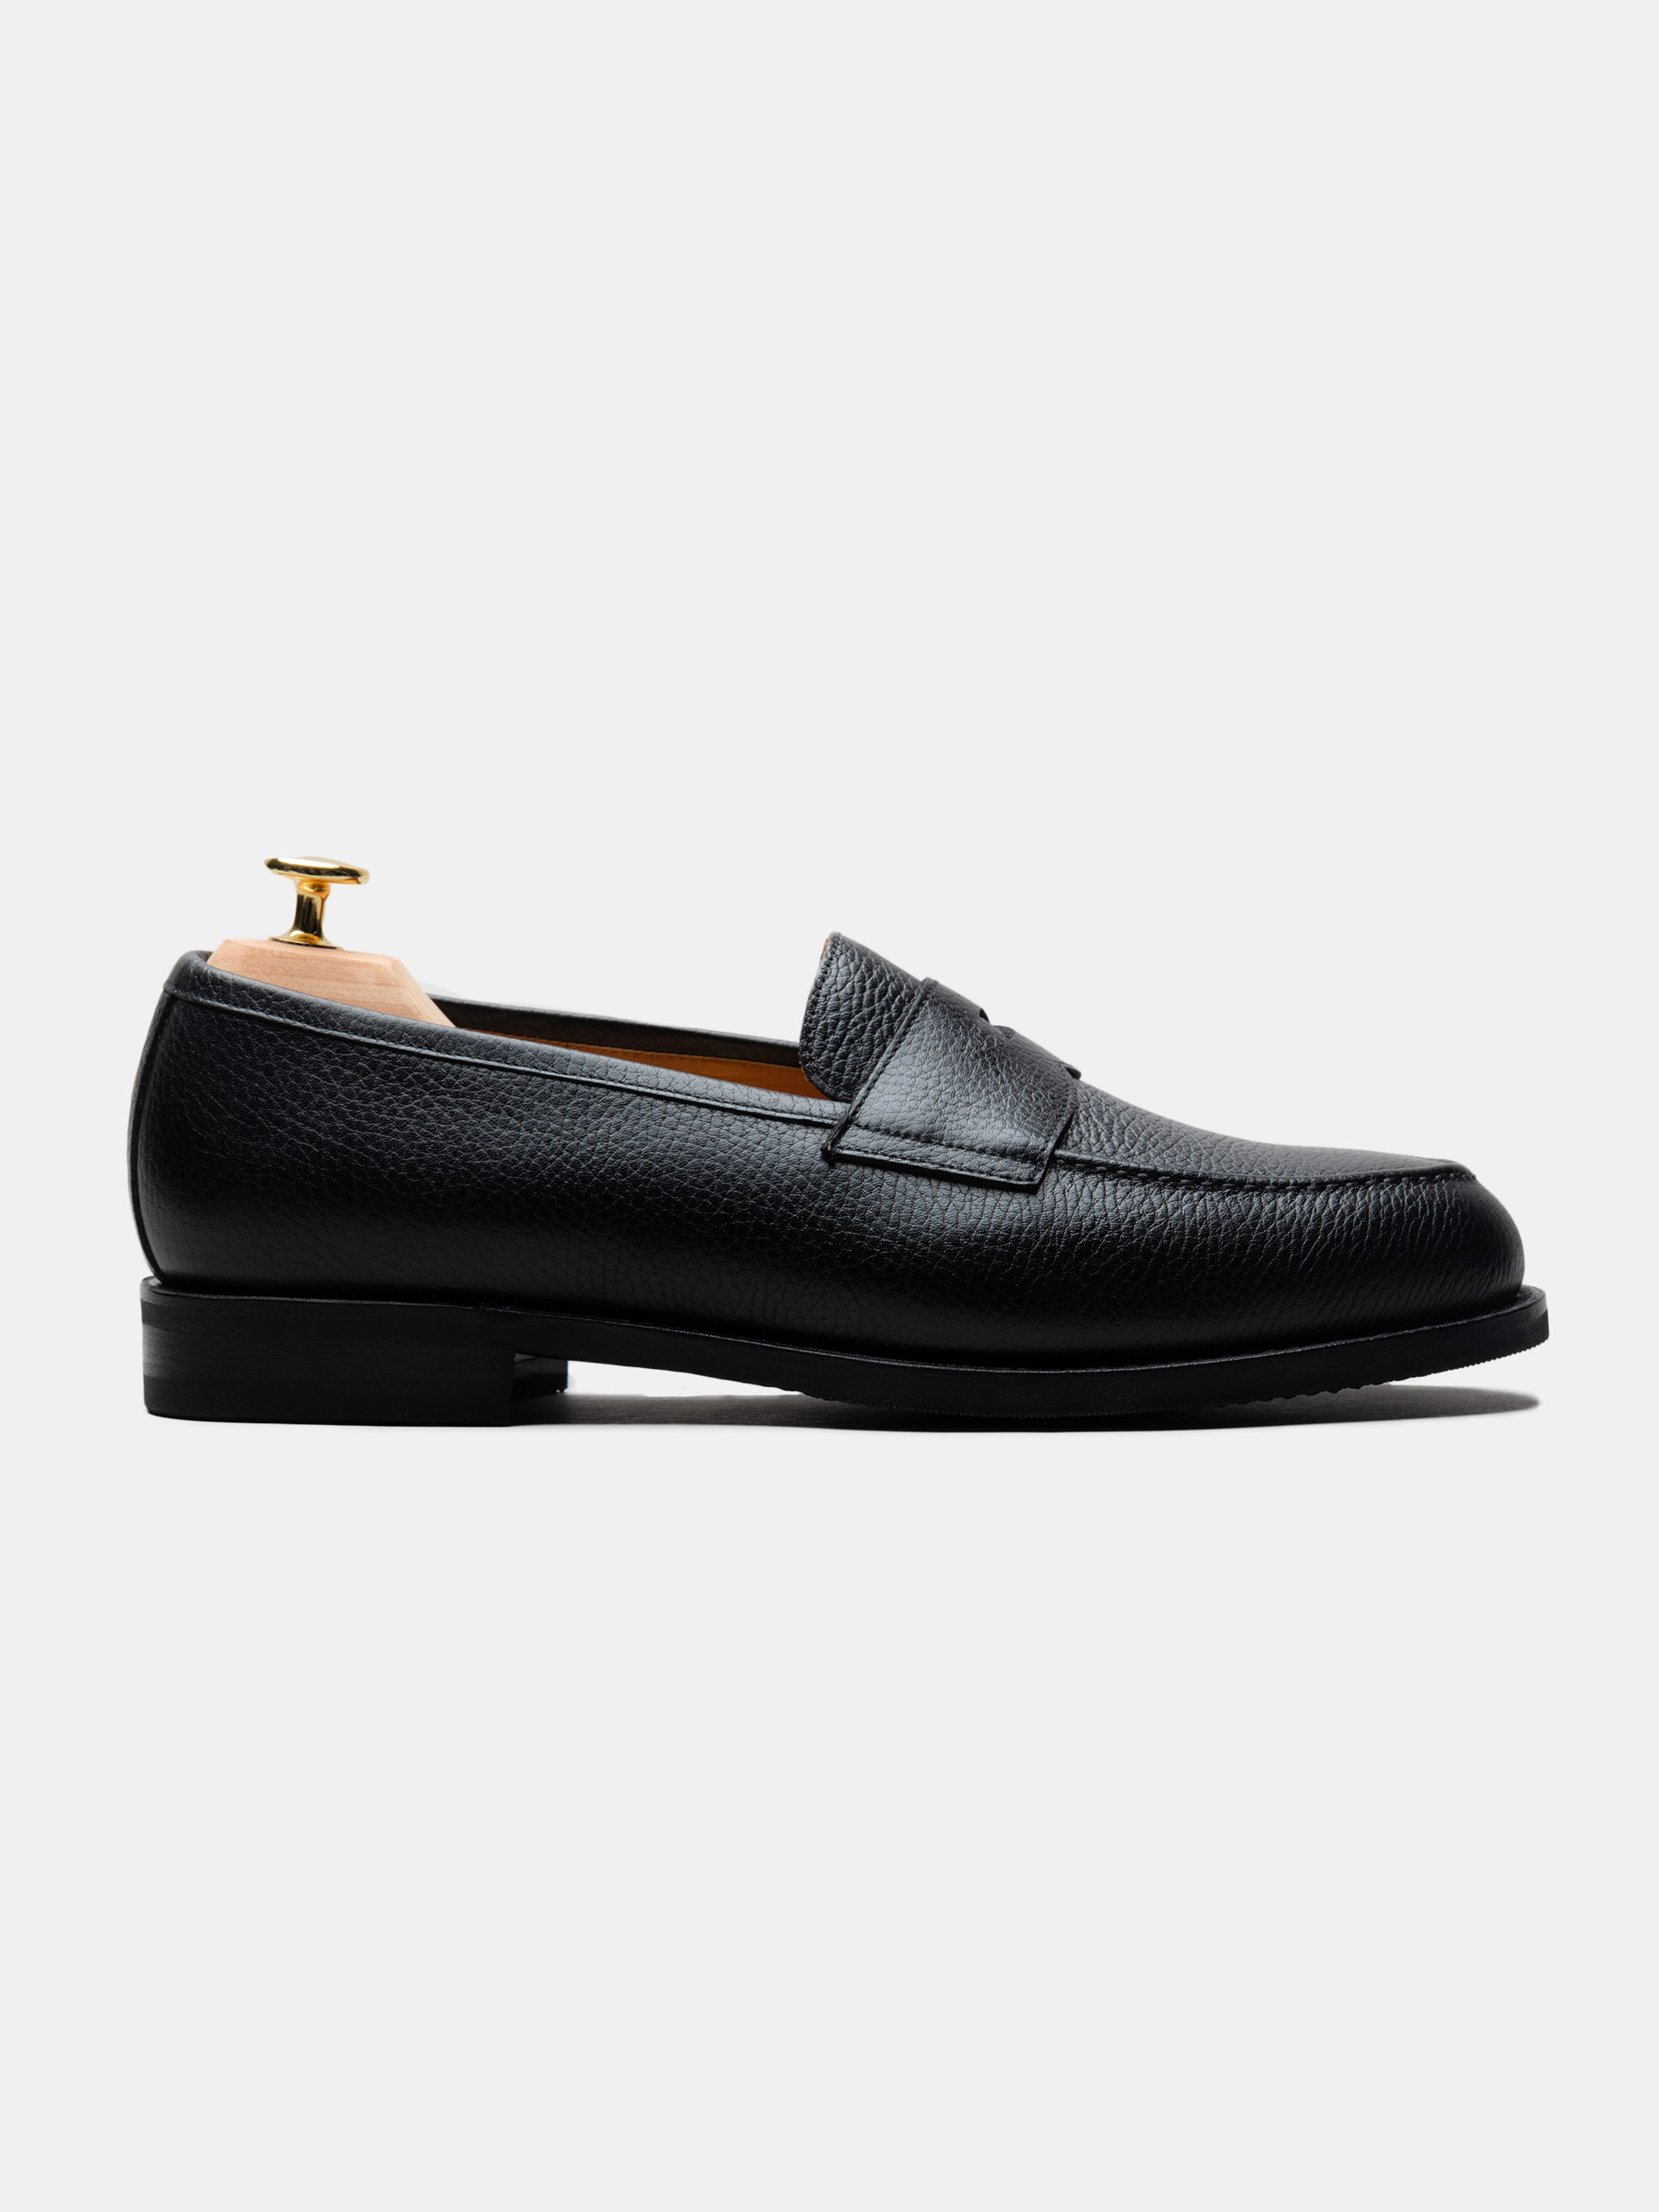 The Penny Loafer - Black Grain - Rubber Sole | MORJAS